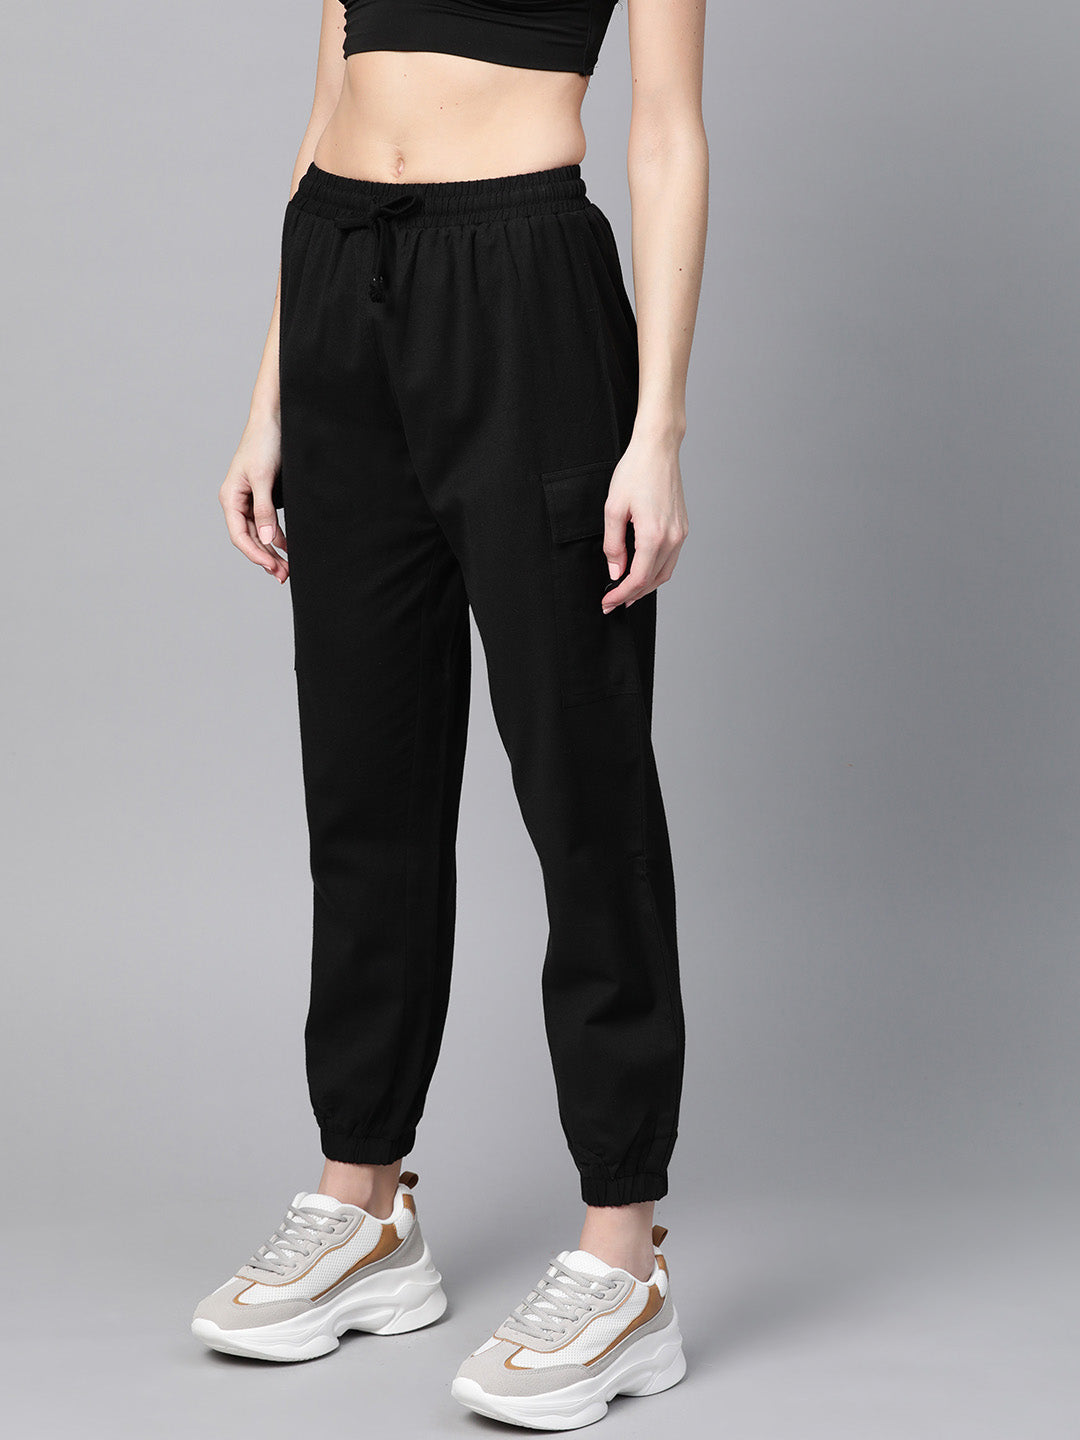  DEAR SPARKLE Jogger with Pockets for Women Drawstring